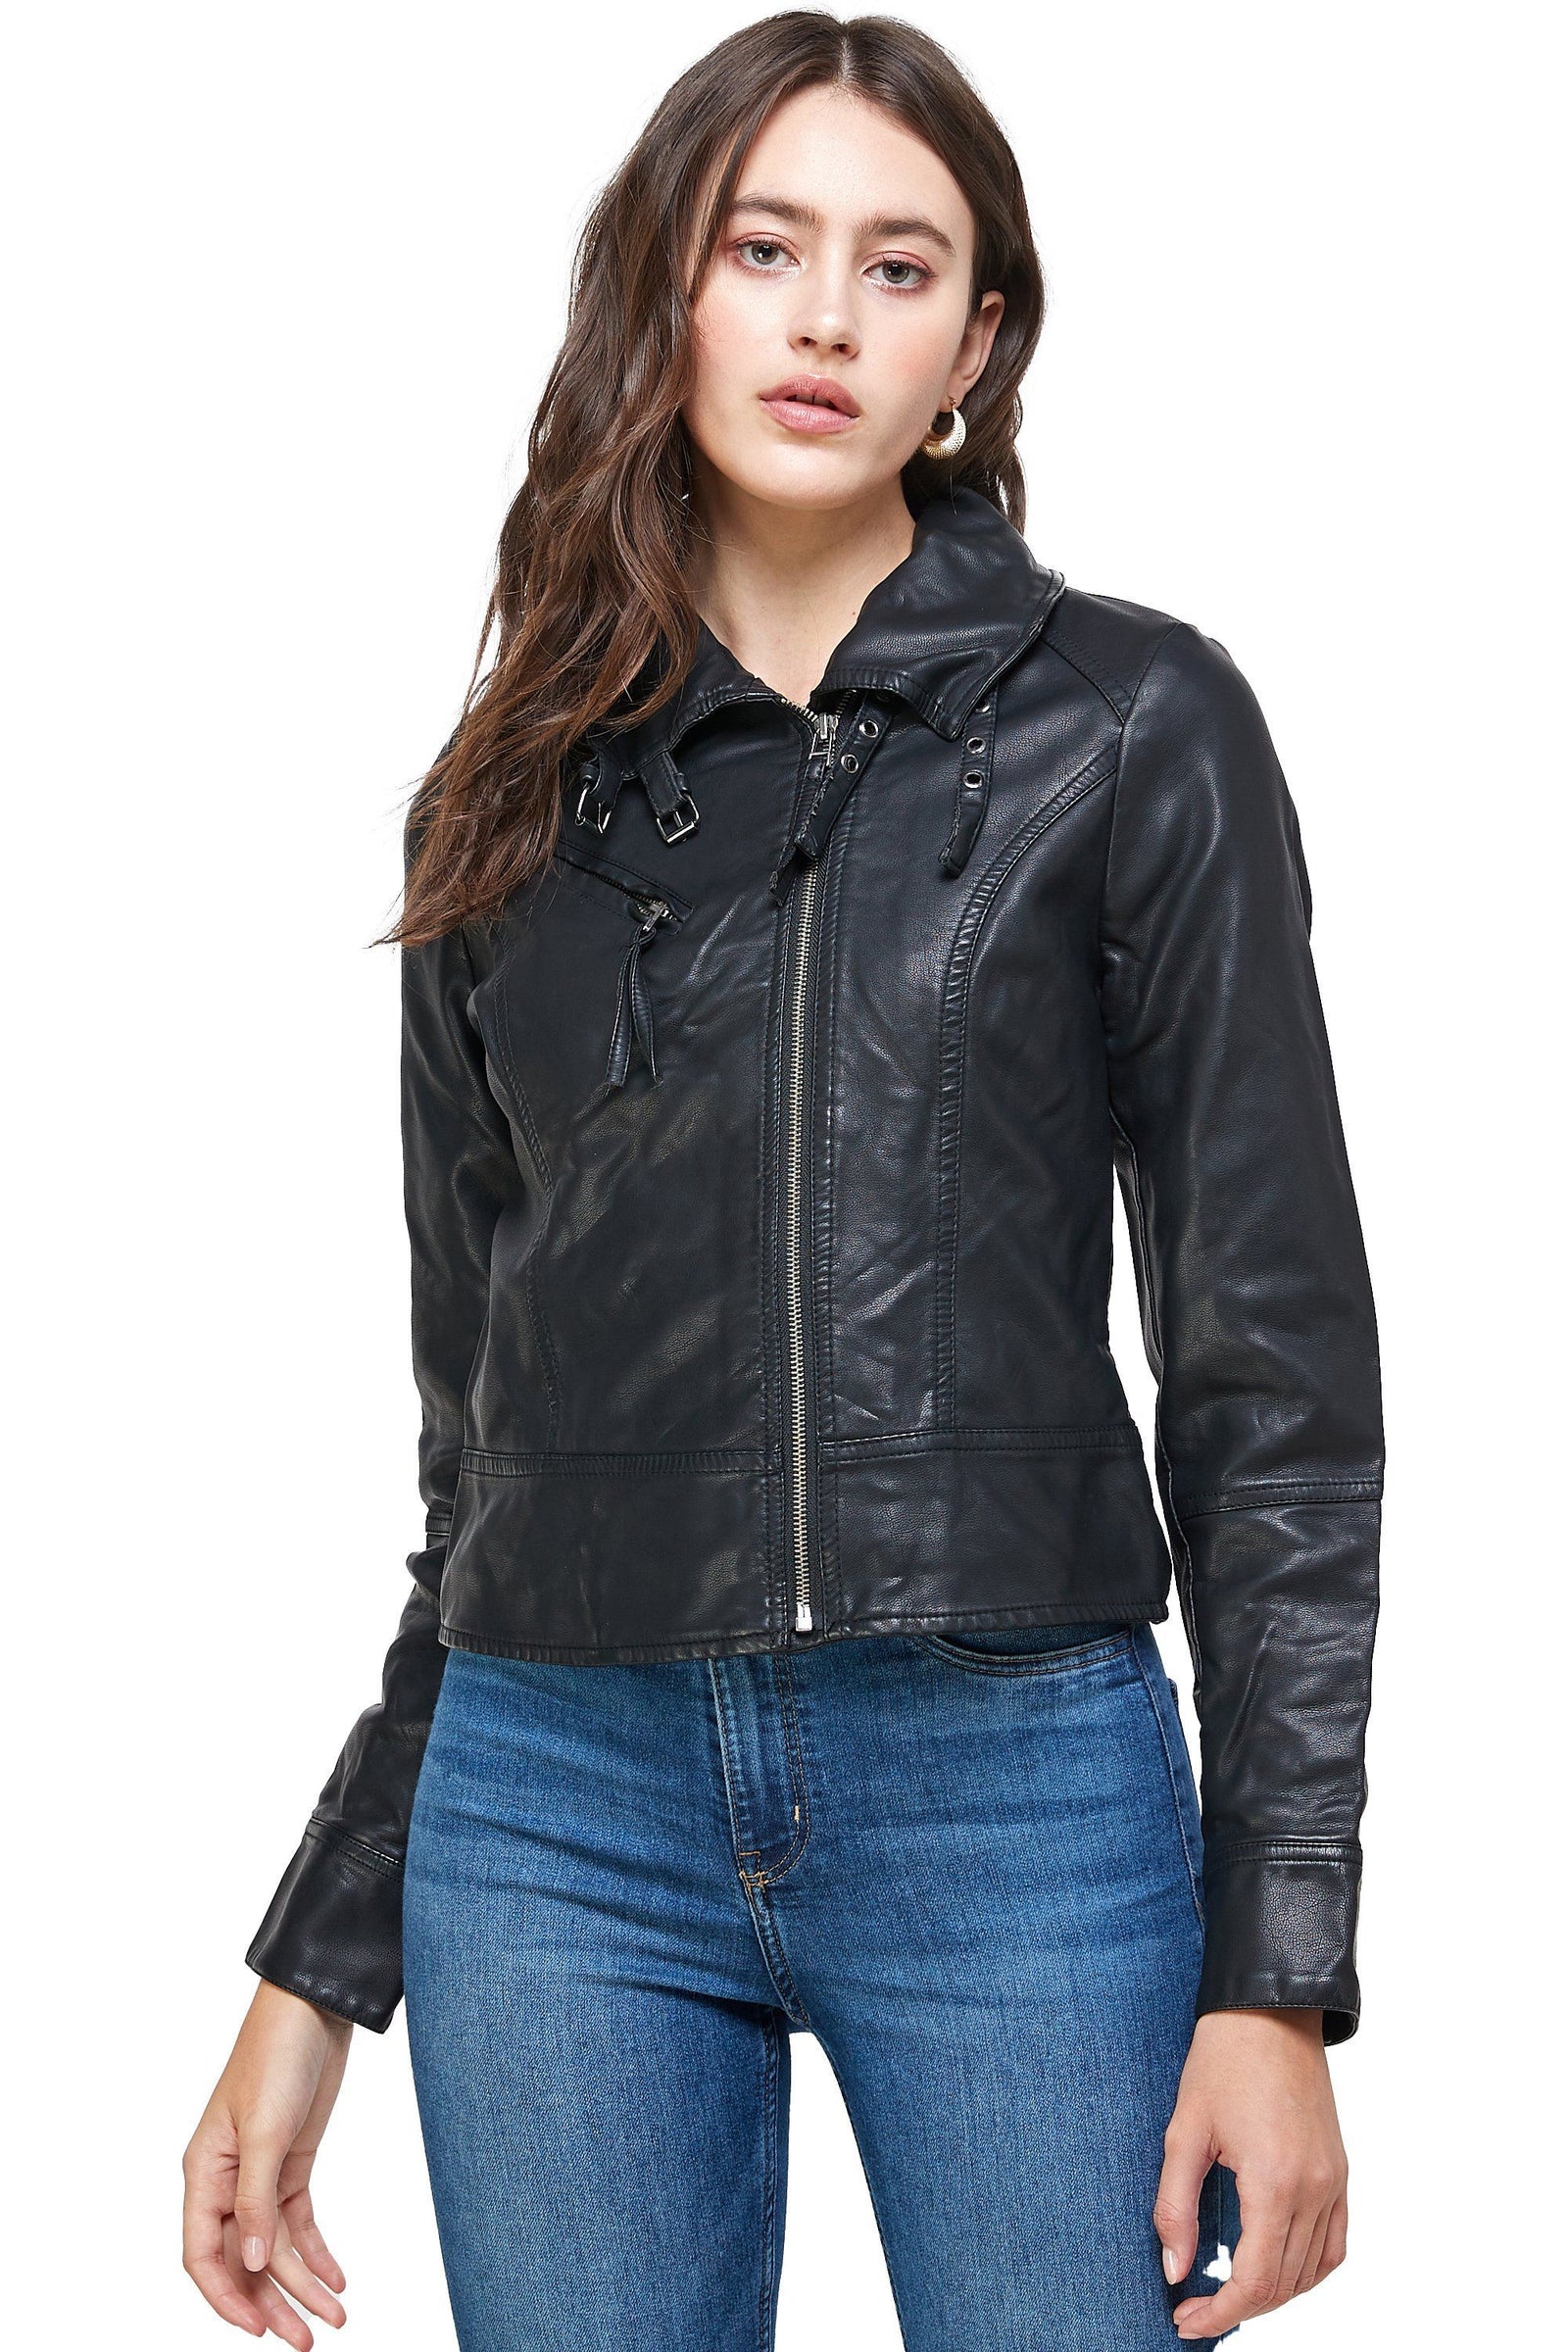 High Neck Vegan Leather Jacket - All Good Laces